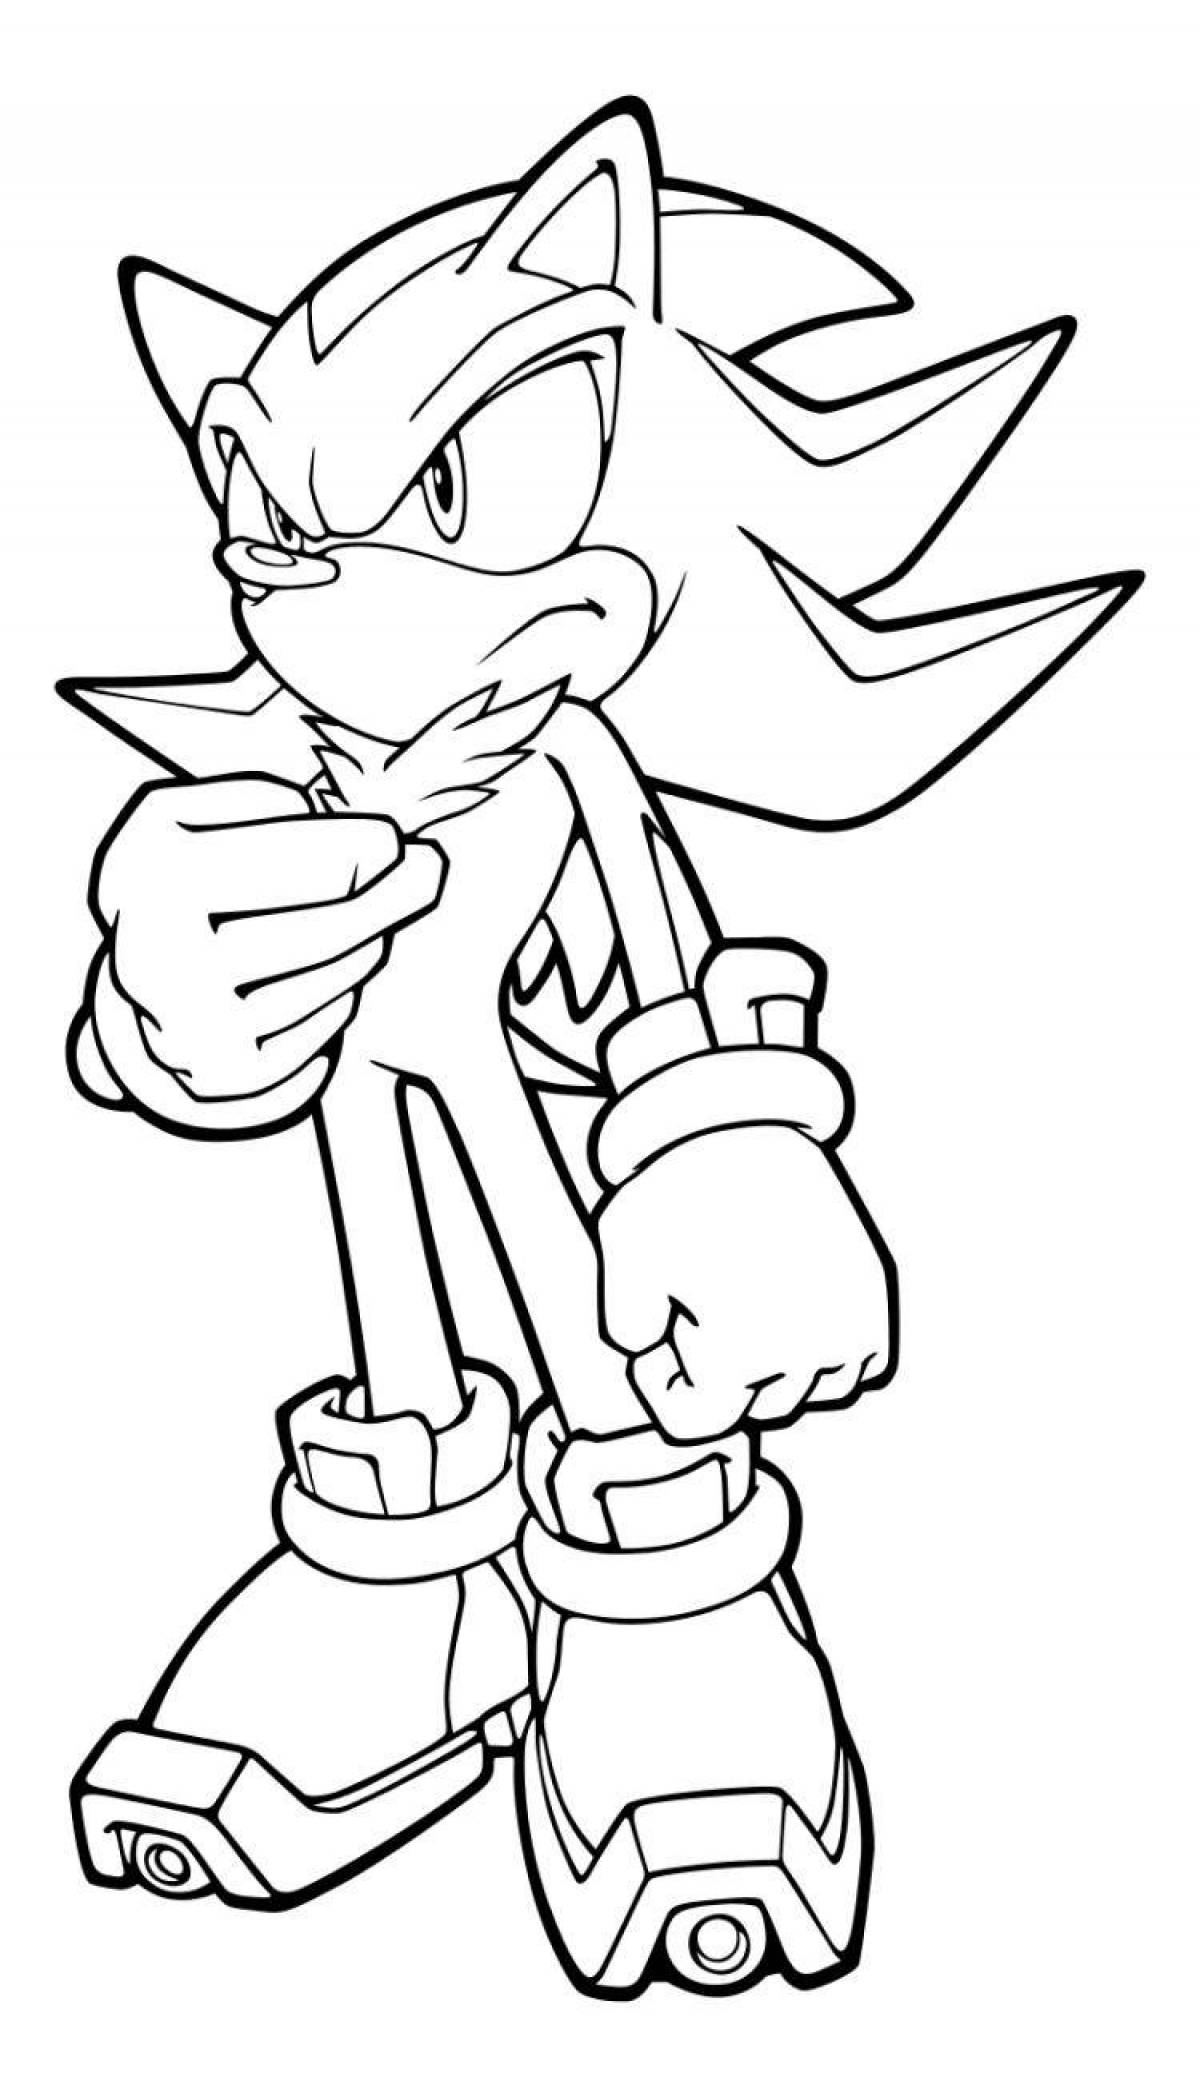 Sonic prime refresh coloring book